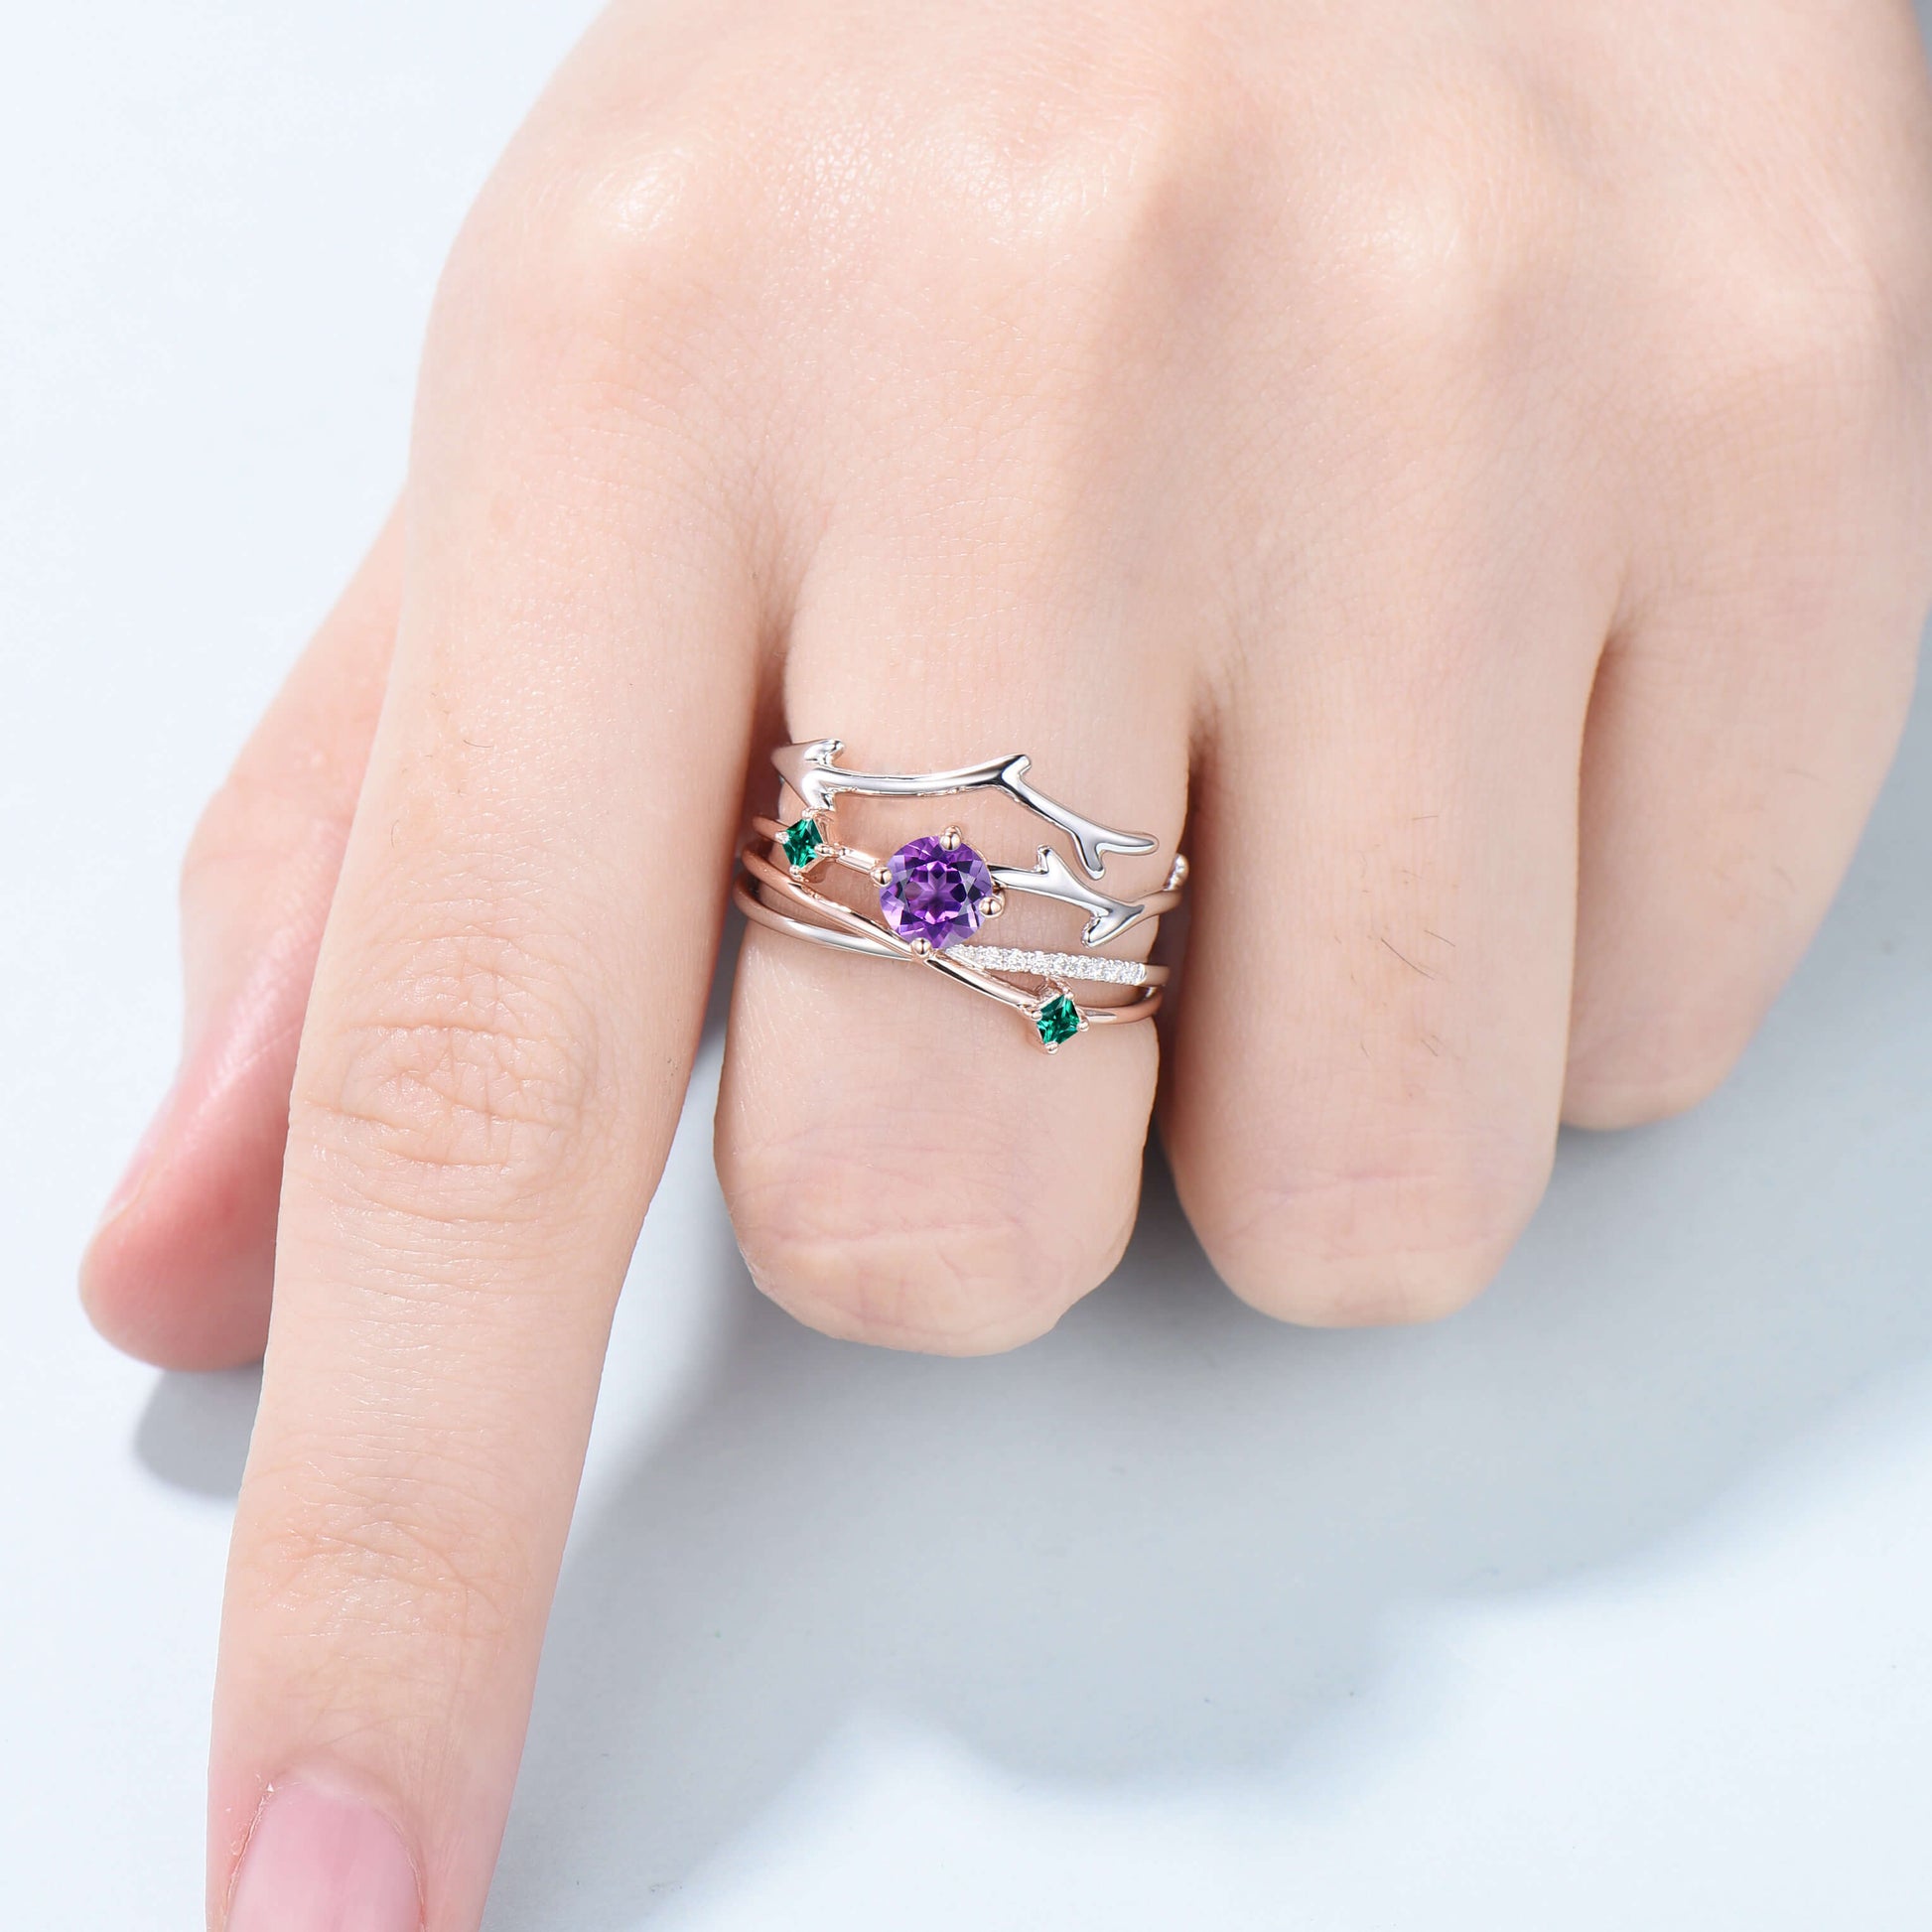 Two-tone gold Twig amethyst engagement ring set dainty Leaf green emerald branch wedding set women Unique natural inspired anniversary gift - PENFINE